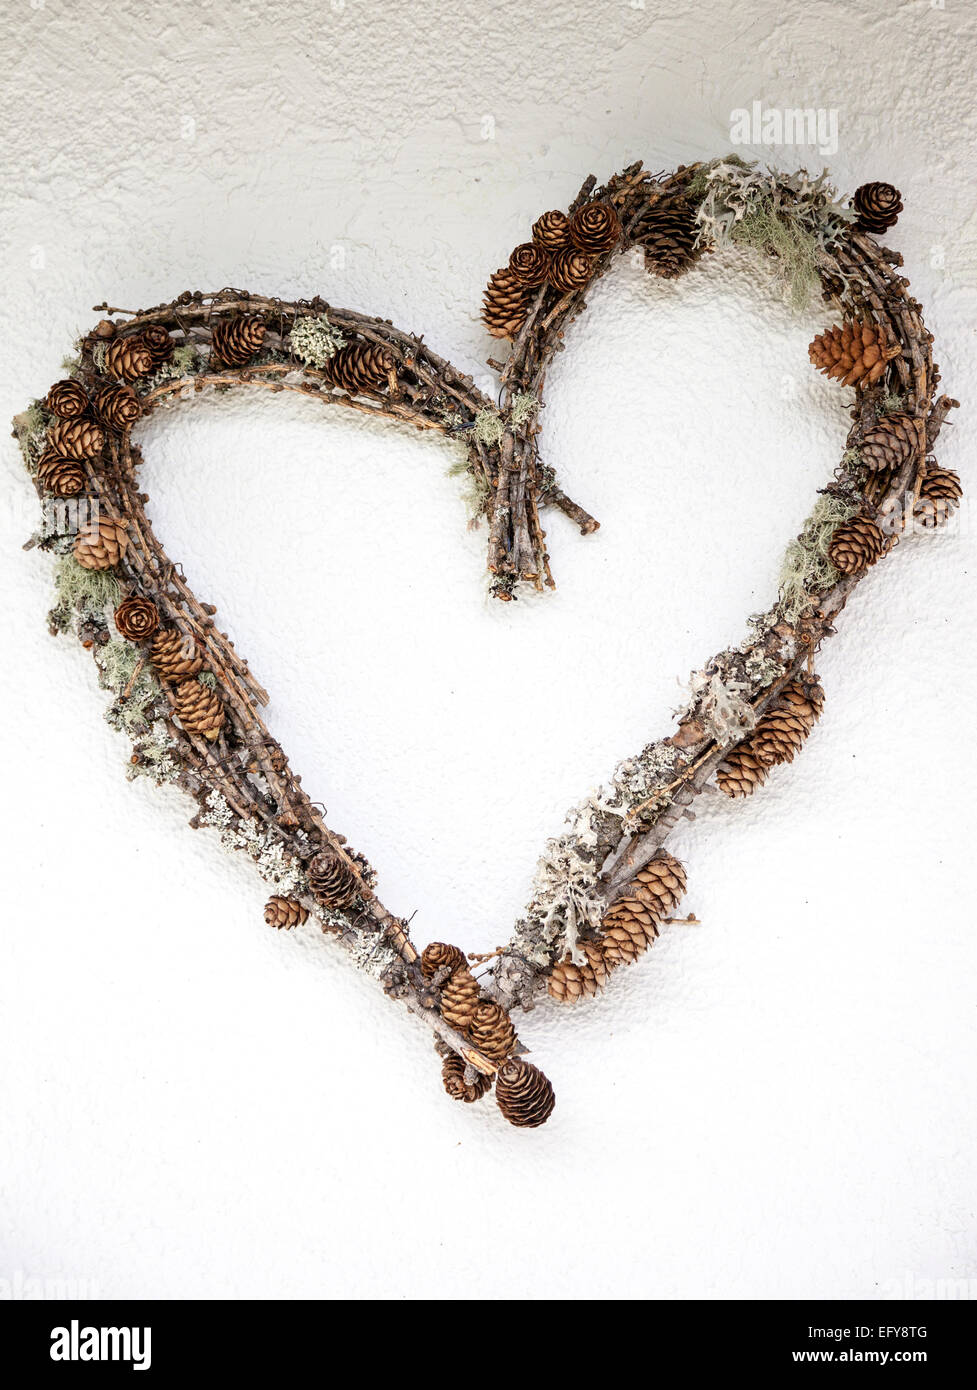 Heart-shaped wreath made of twigs, lichen and cones Stock Photo